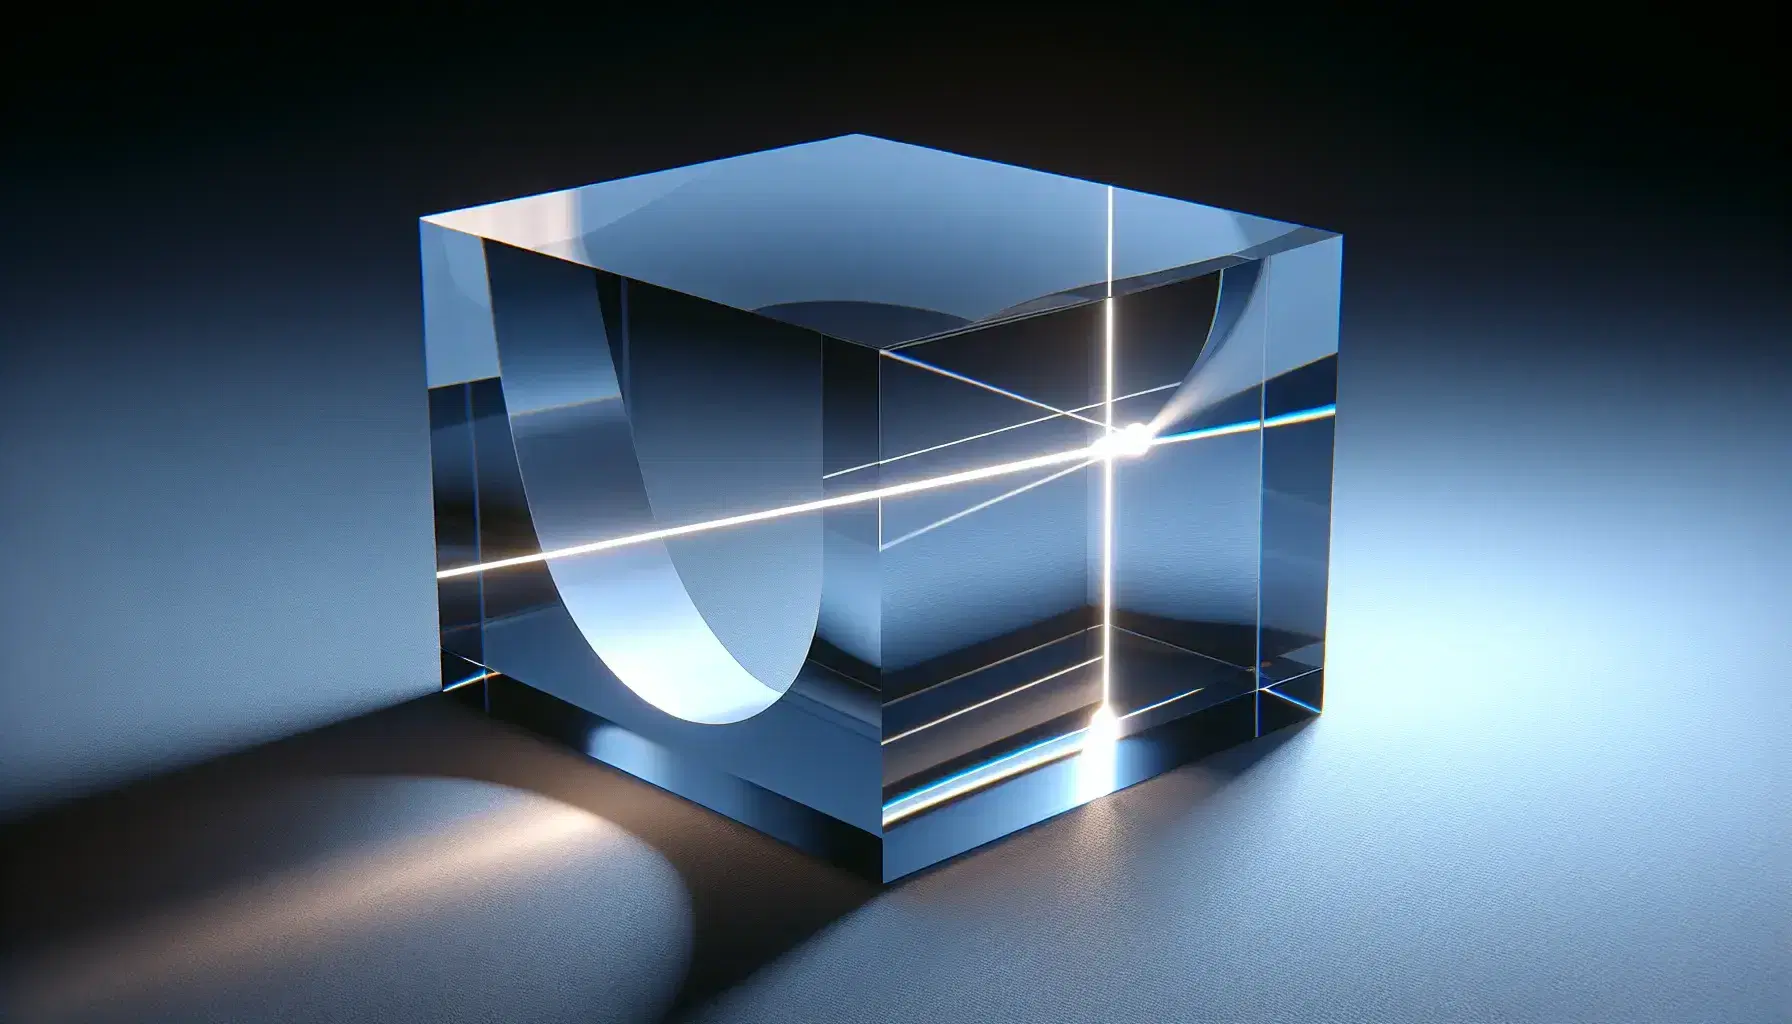 Acrylic block demonstrating total internal reflection with light beam refracting, then reflecting along the curved edge on a gradient background.